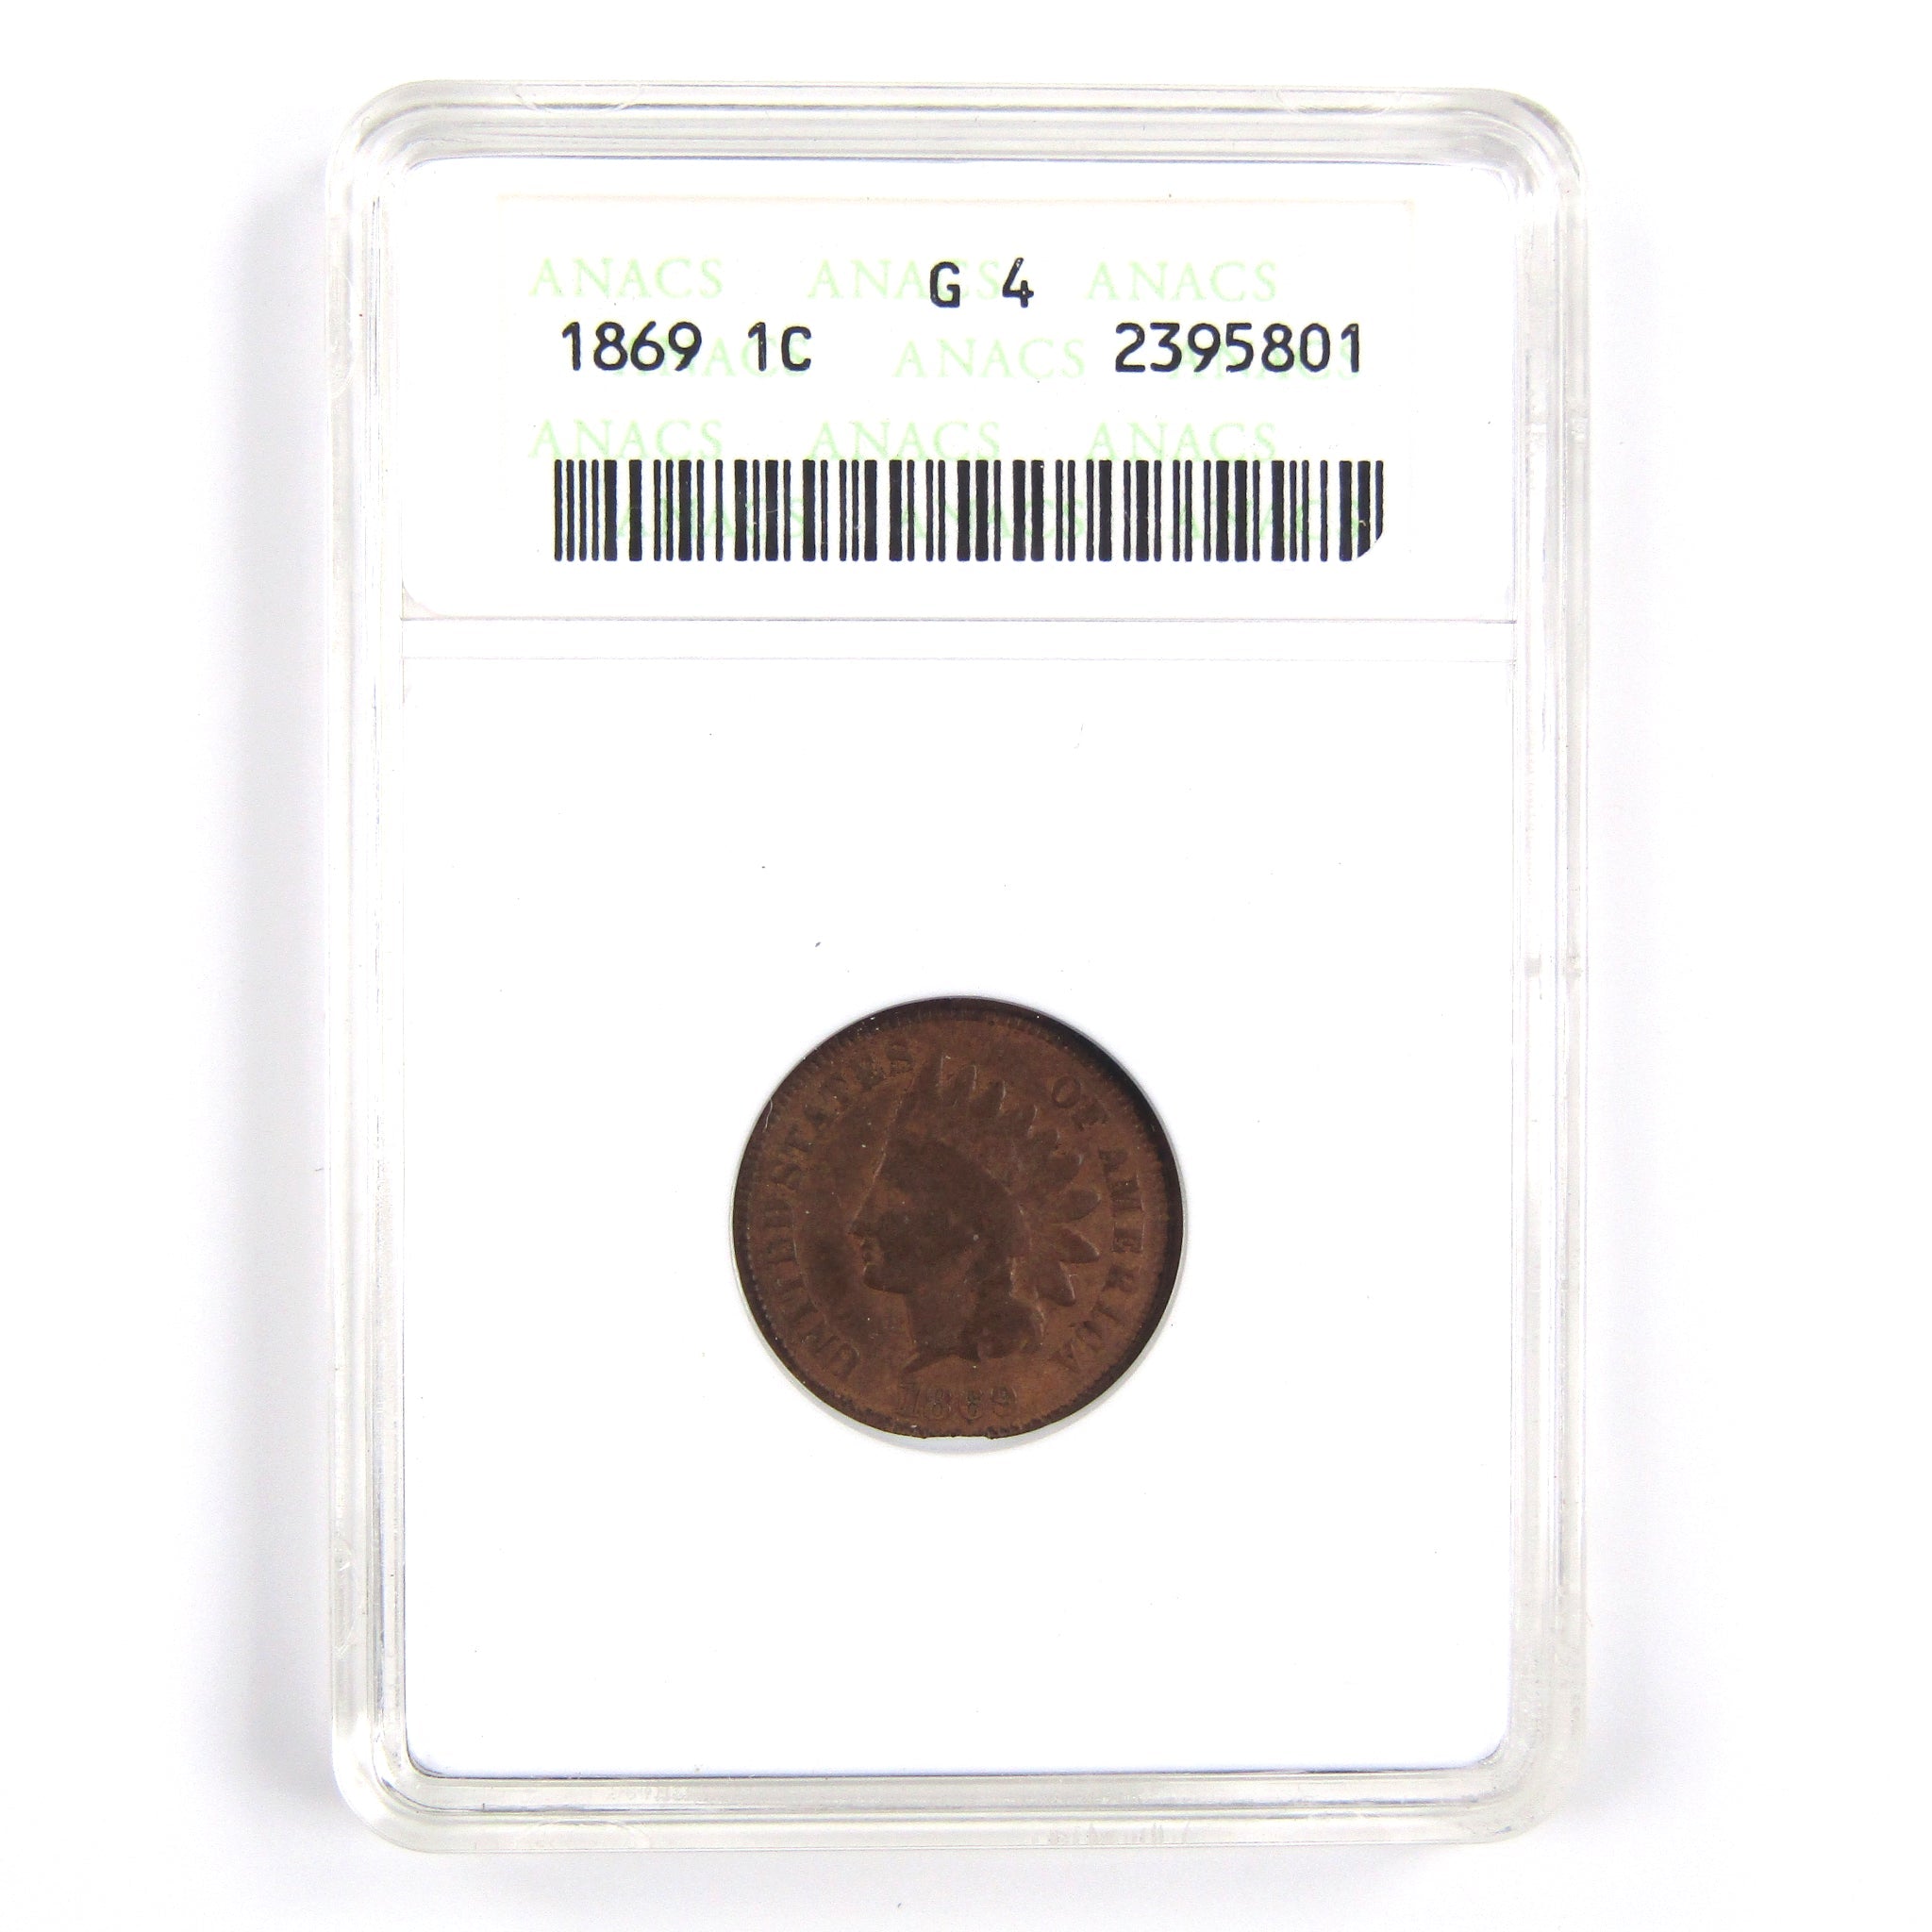 1869 Indian Head Cent G 4 ANACS Penny 1c US Coin Collectible SKU:I2402